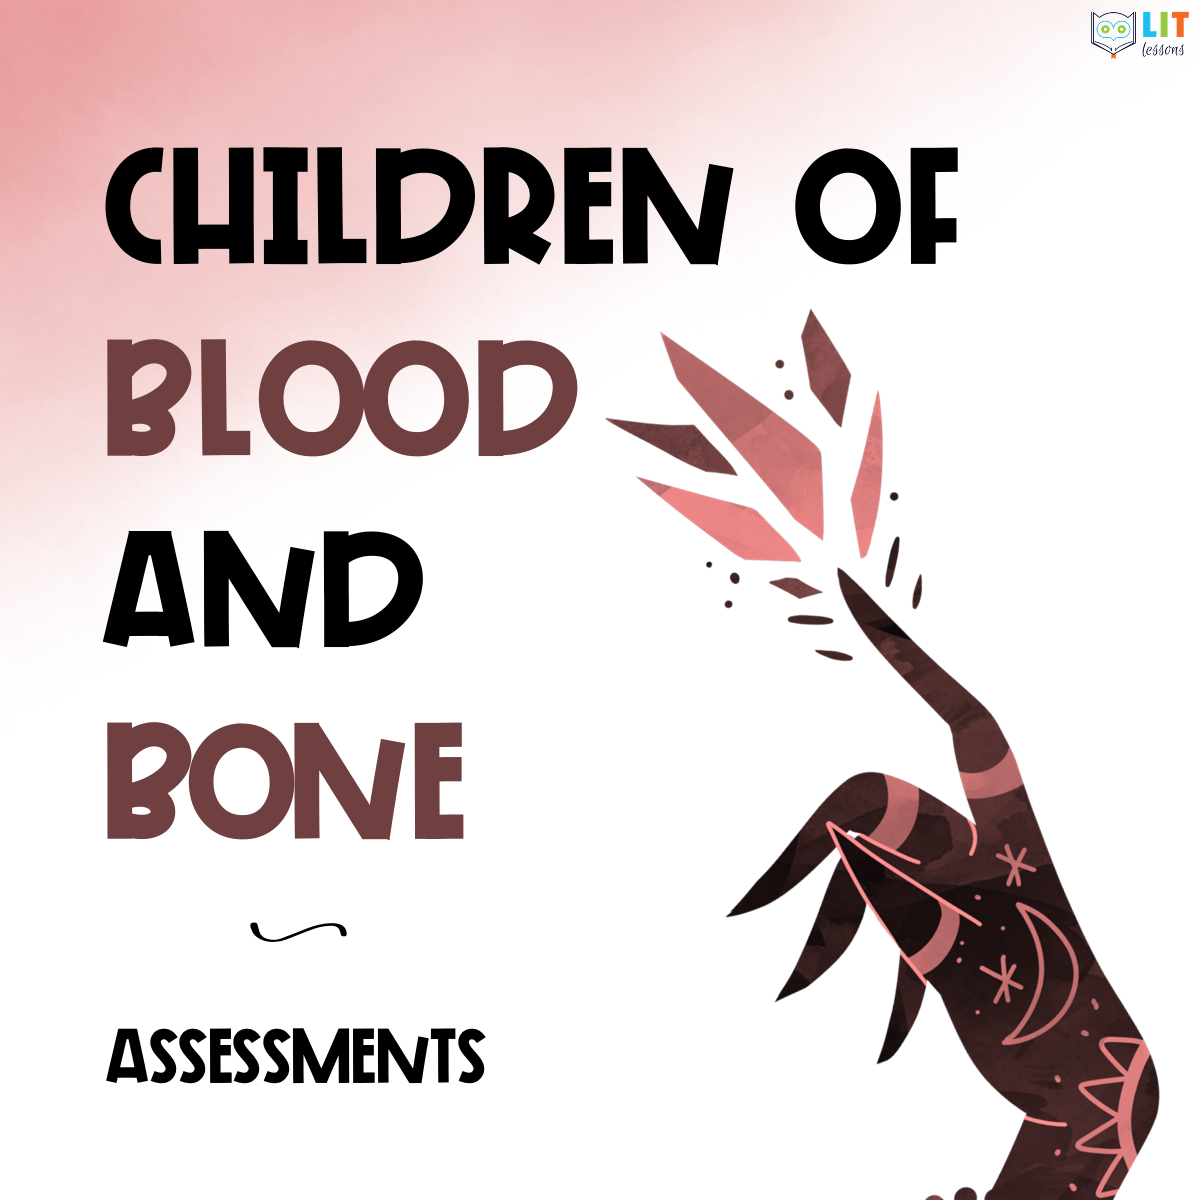 Children of Blood and Bone Assessments